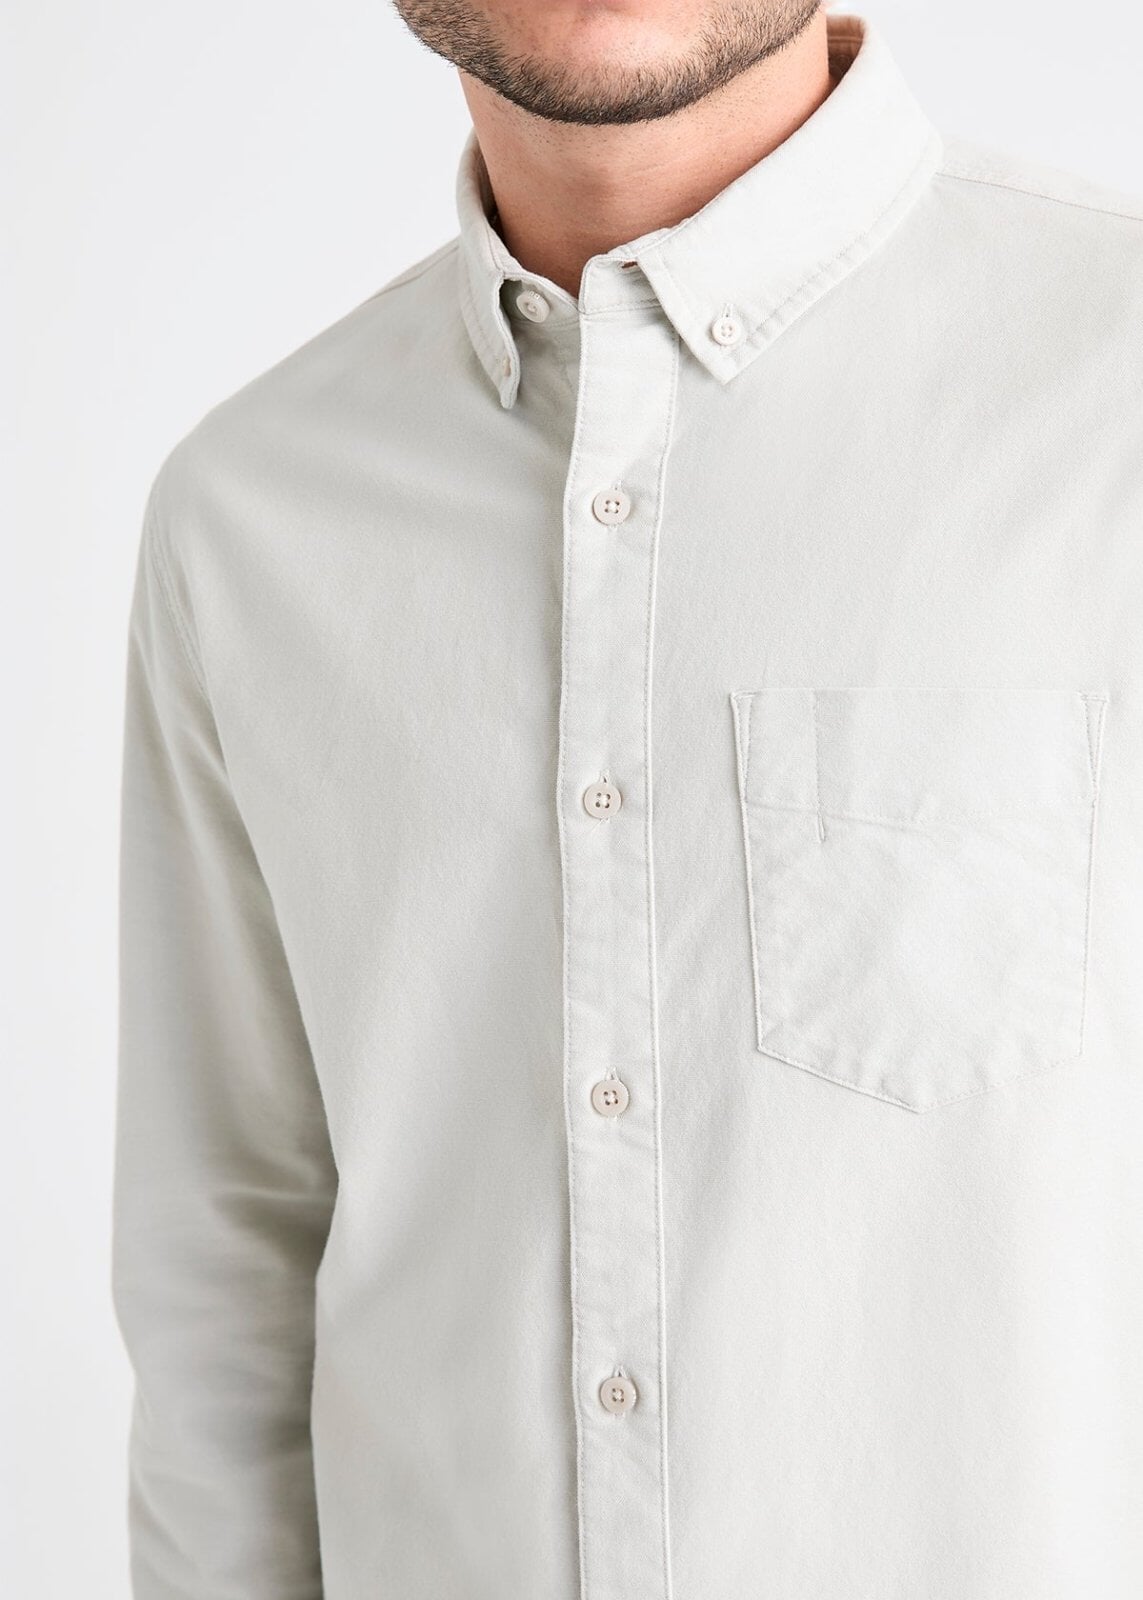 mens off-white stretch button down shirt button and chest pocket details